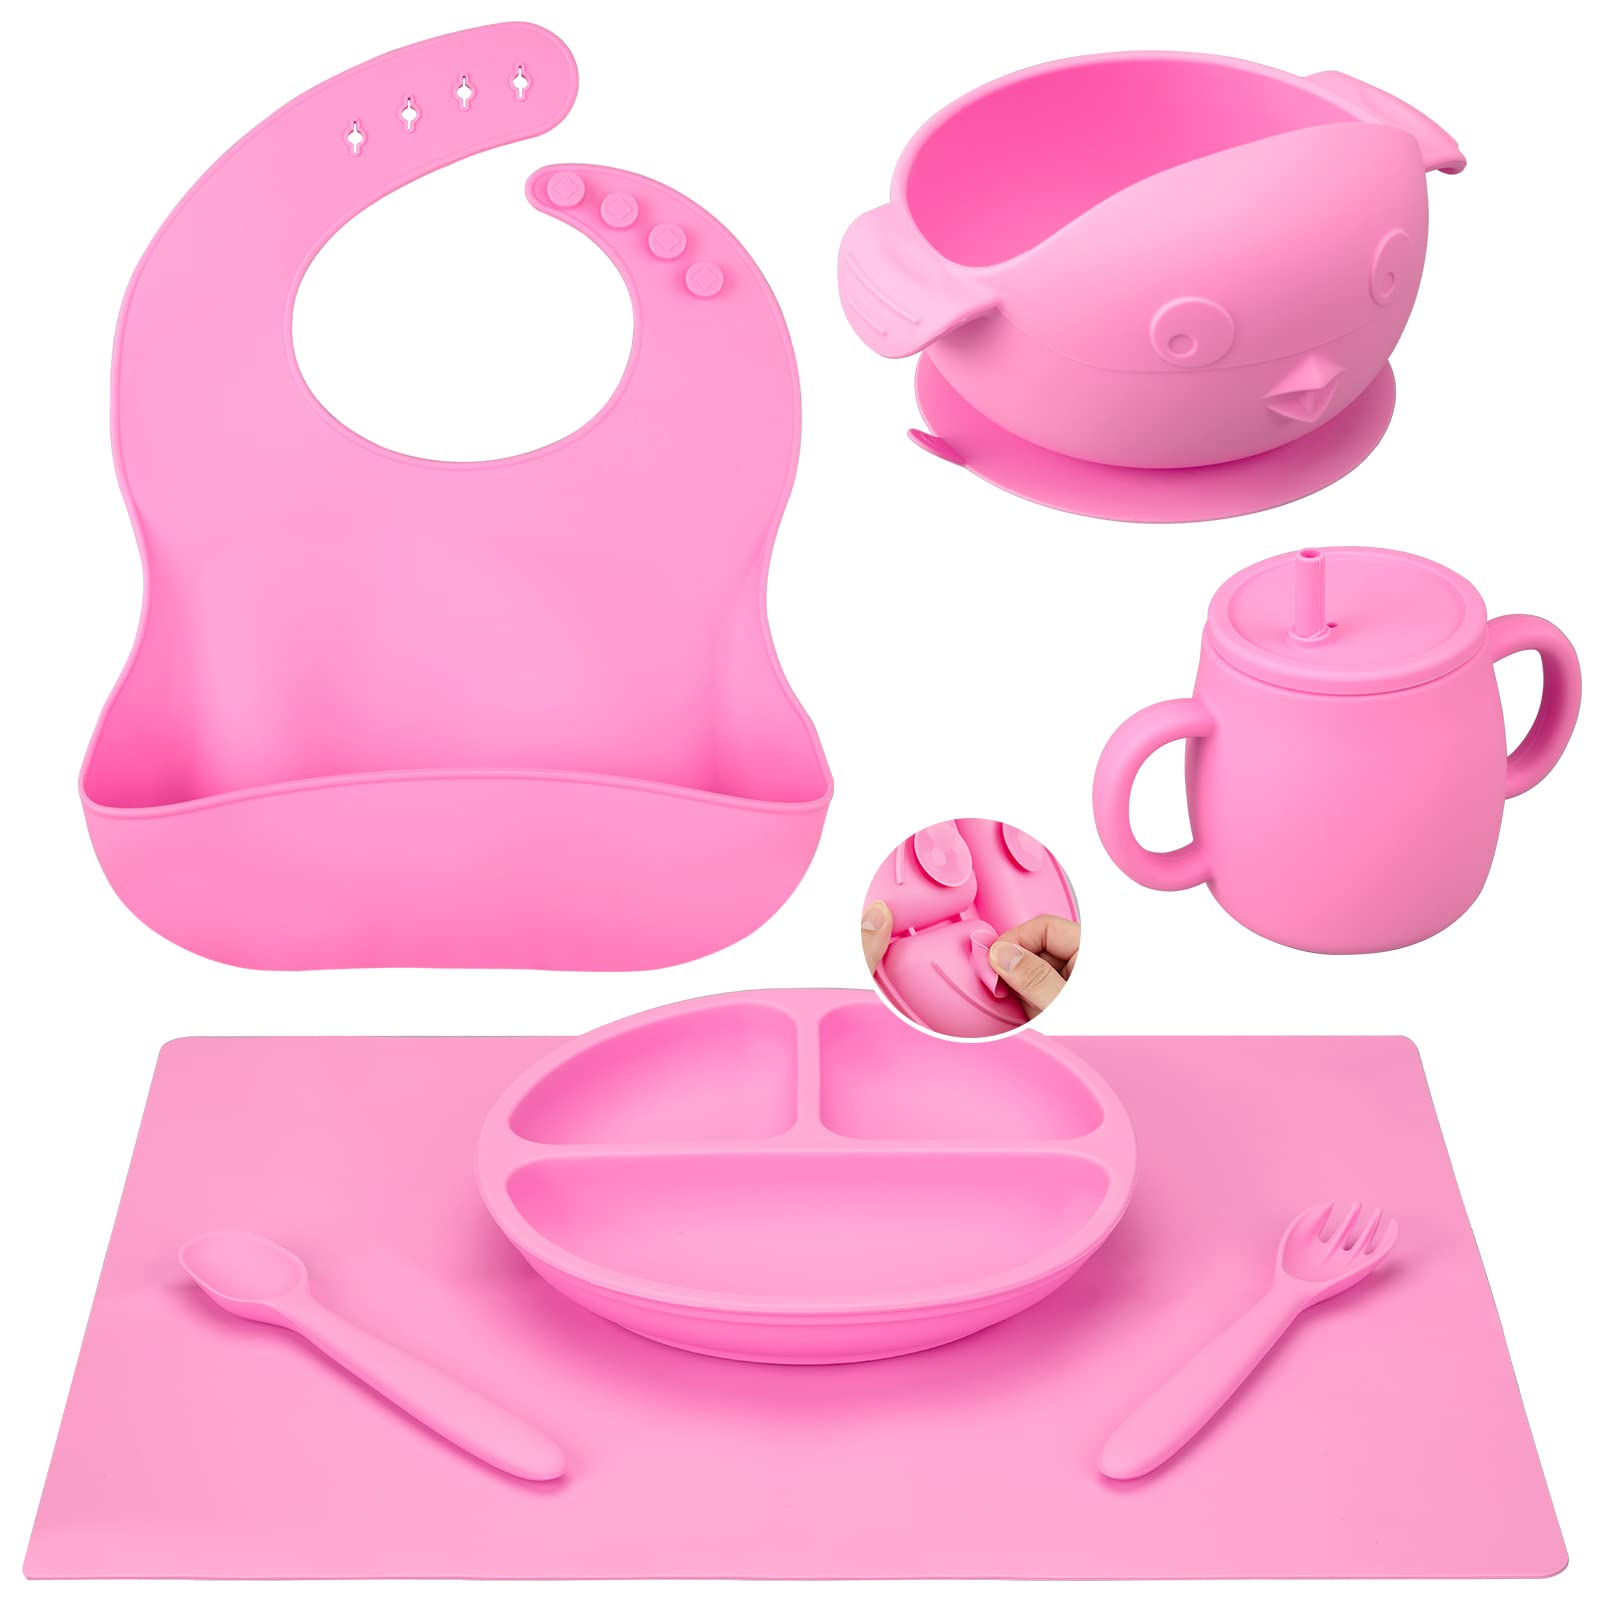 6pcs Pink 100% Non-toxic Suction Baby Feeding Set, 0-6 Month Baby Bowl,  Plate, Cup, Fork and Spoon Feeding Supplies